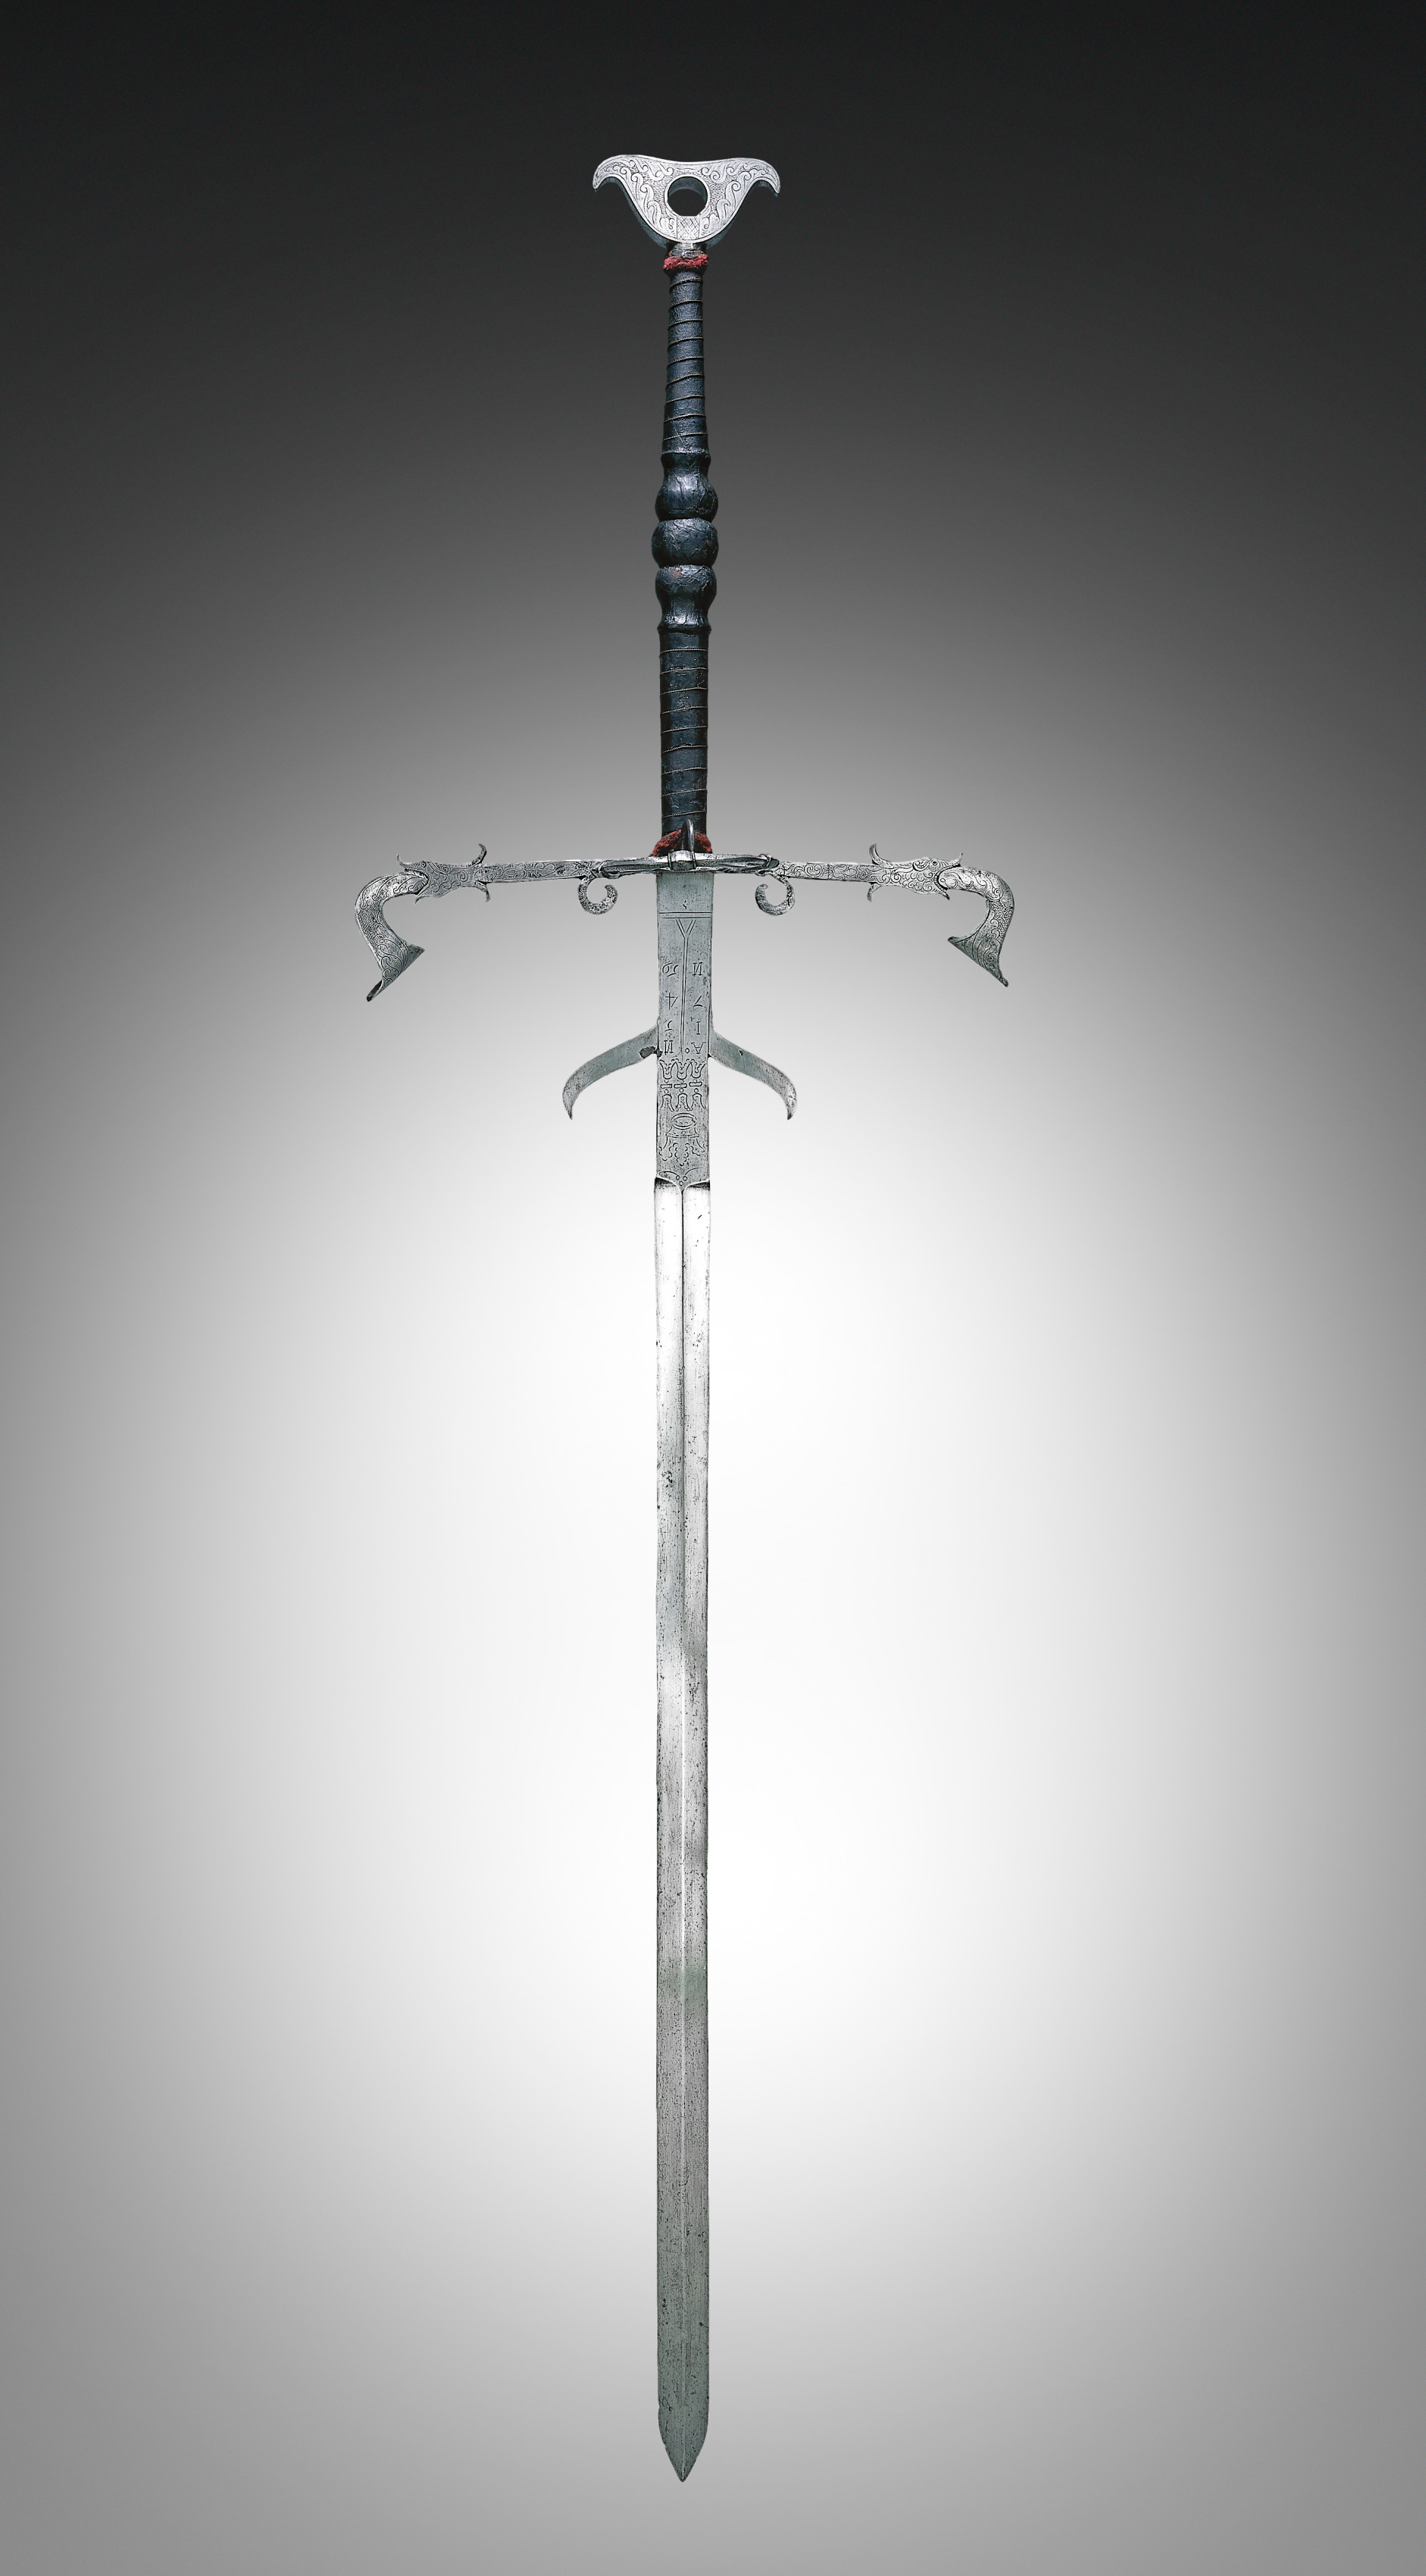 Two-Handed Sword of the State Guard of Julius of Brunswick-Lunüneburg